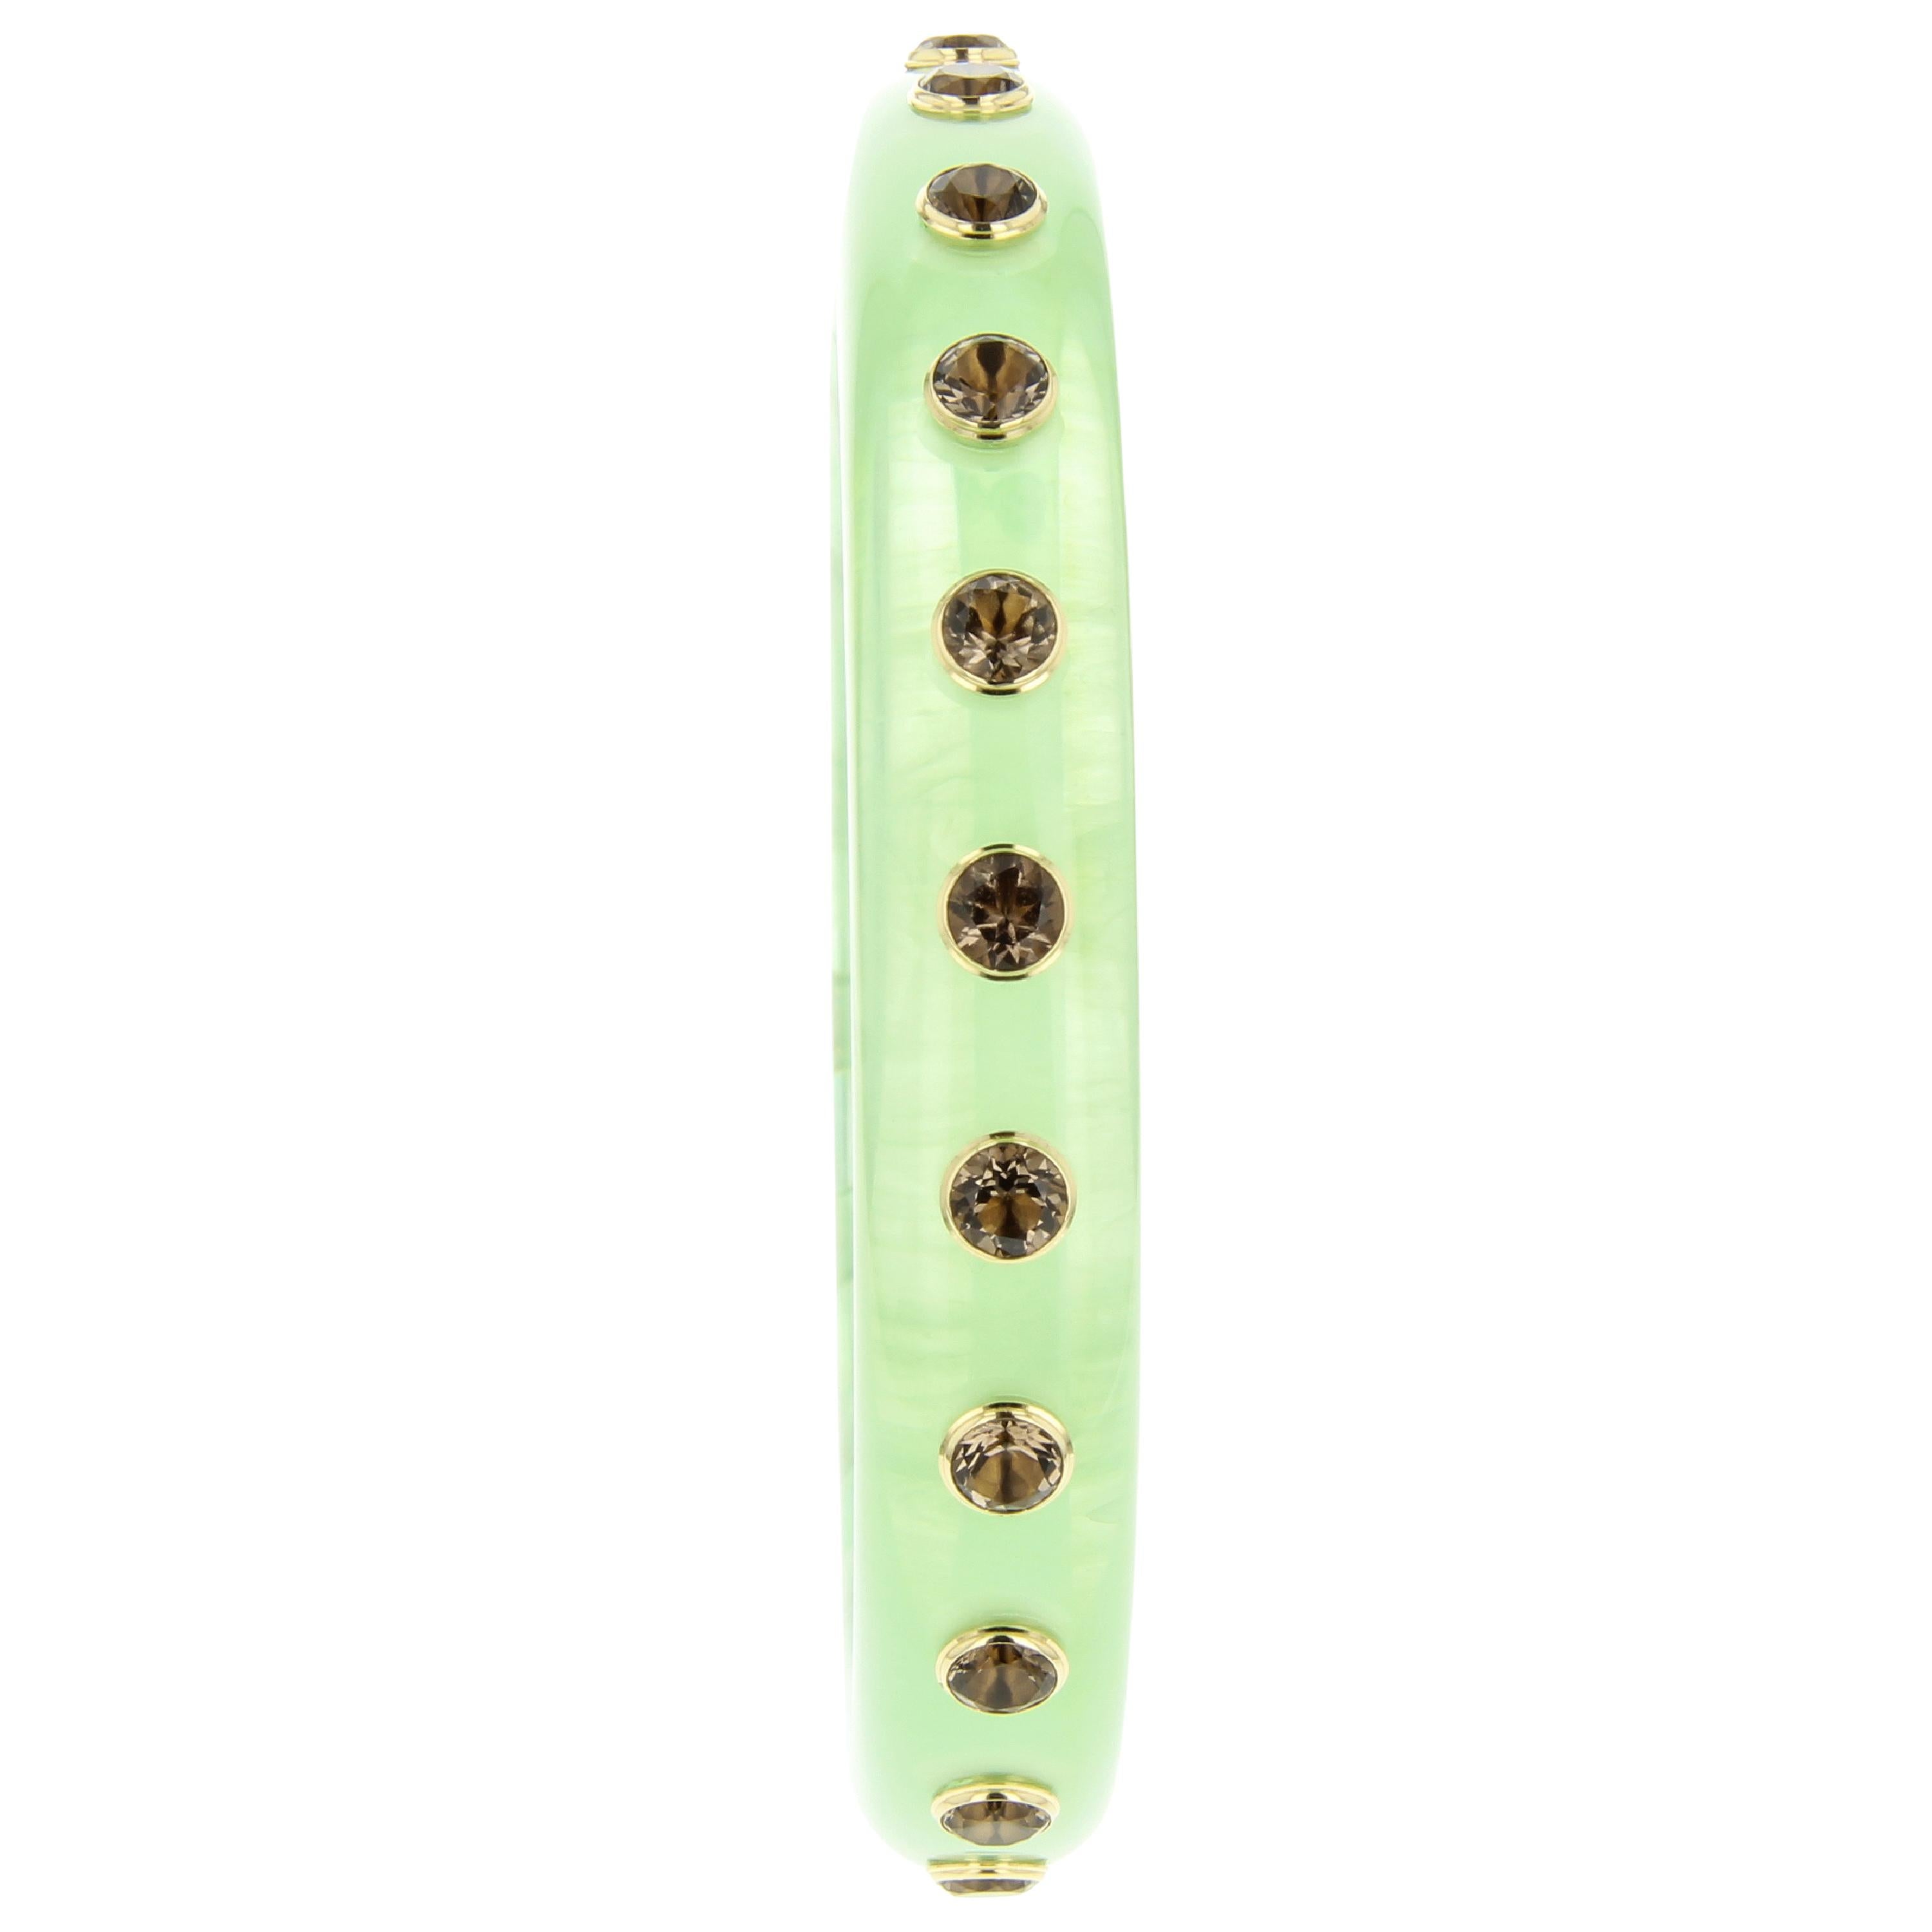 This beautiful bangle was created by Mark Davis in an unusual, highly translucent, soft green, vintage bakelite. Twenty-two evenly spaced smoky quartz in 18k yellow gold bezels encircle the bangle. The surprisingly versatile and unusual color pairs